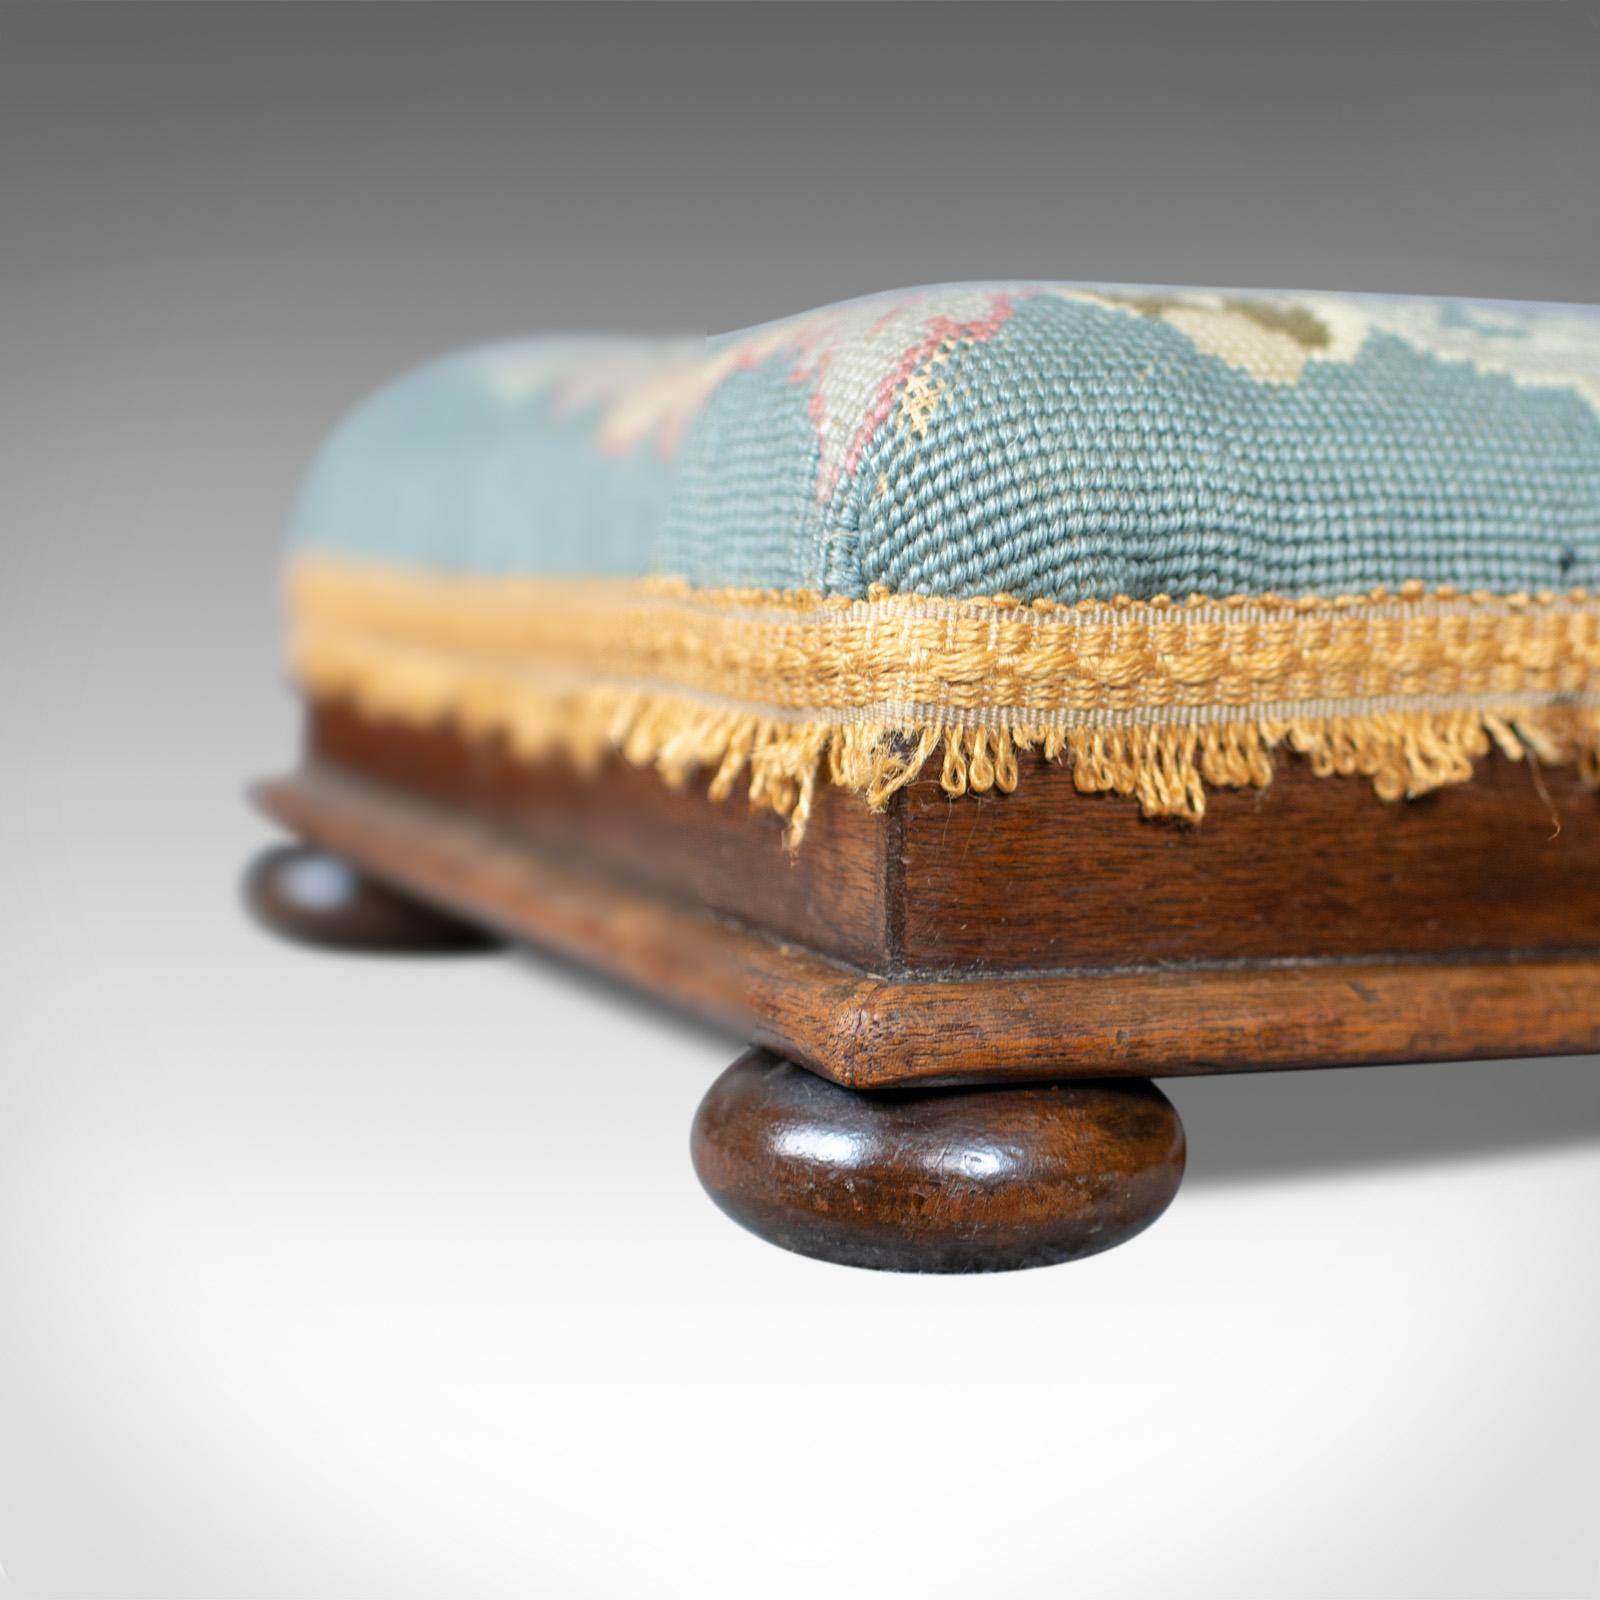 Walnut Square Antique Footstool, English, Victorian, Needlepoint, Carriage, circa 1890